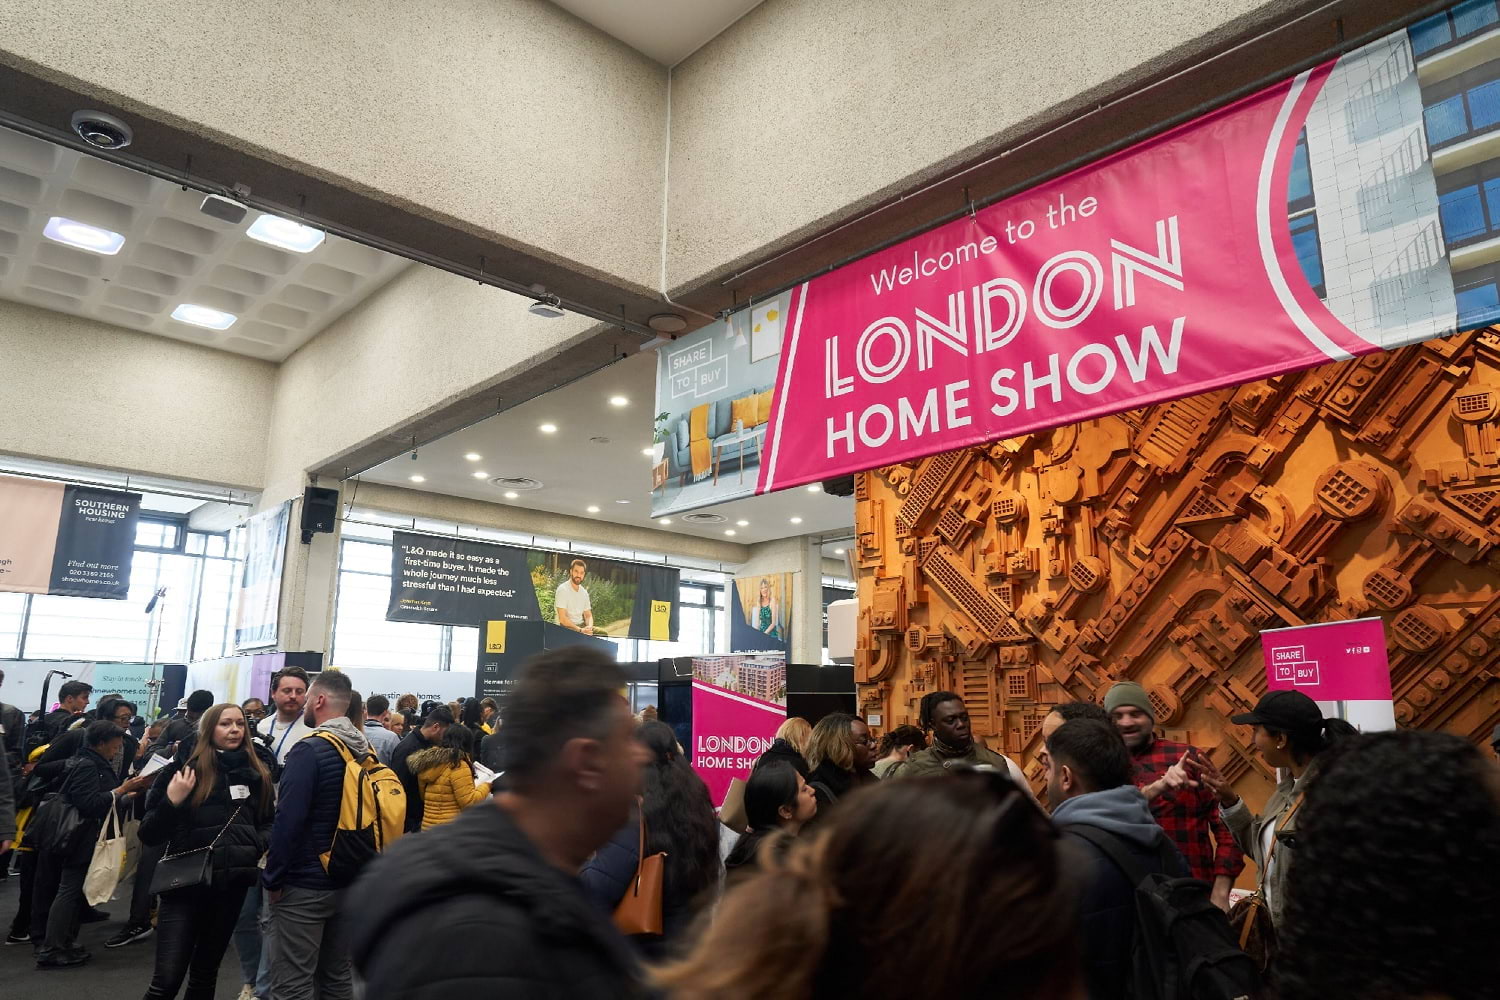 The London Home Show